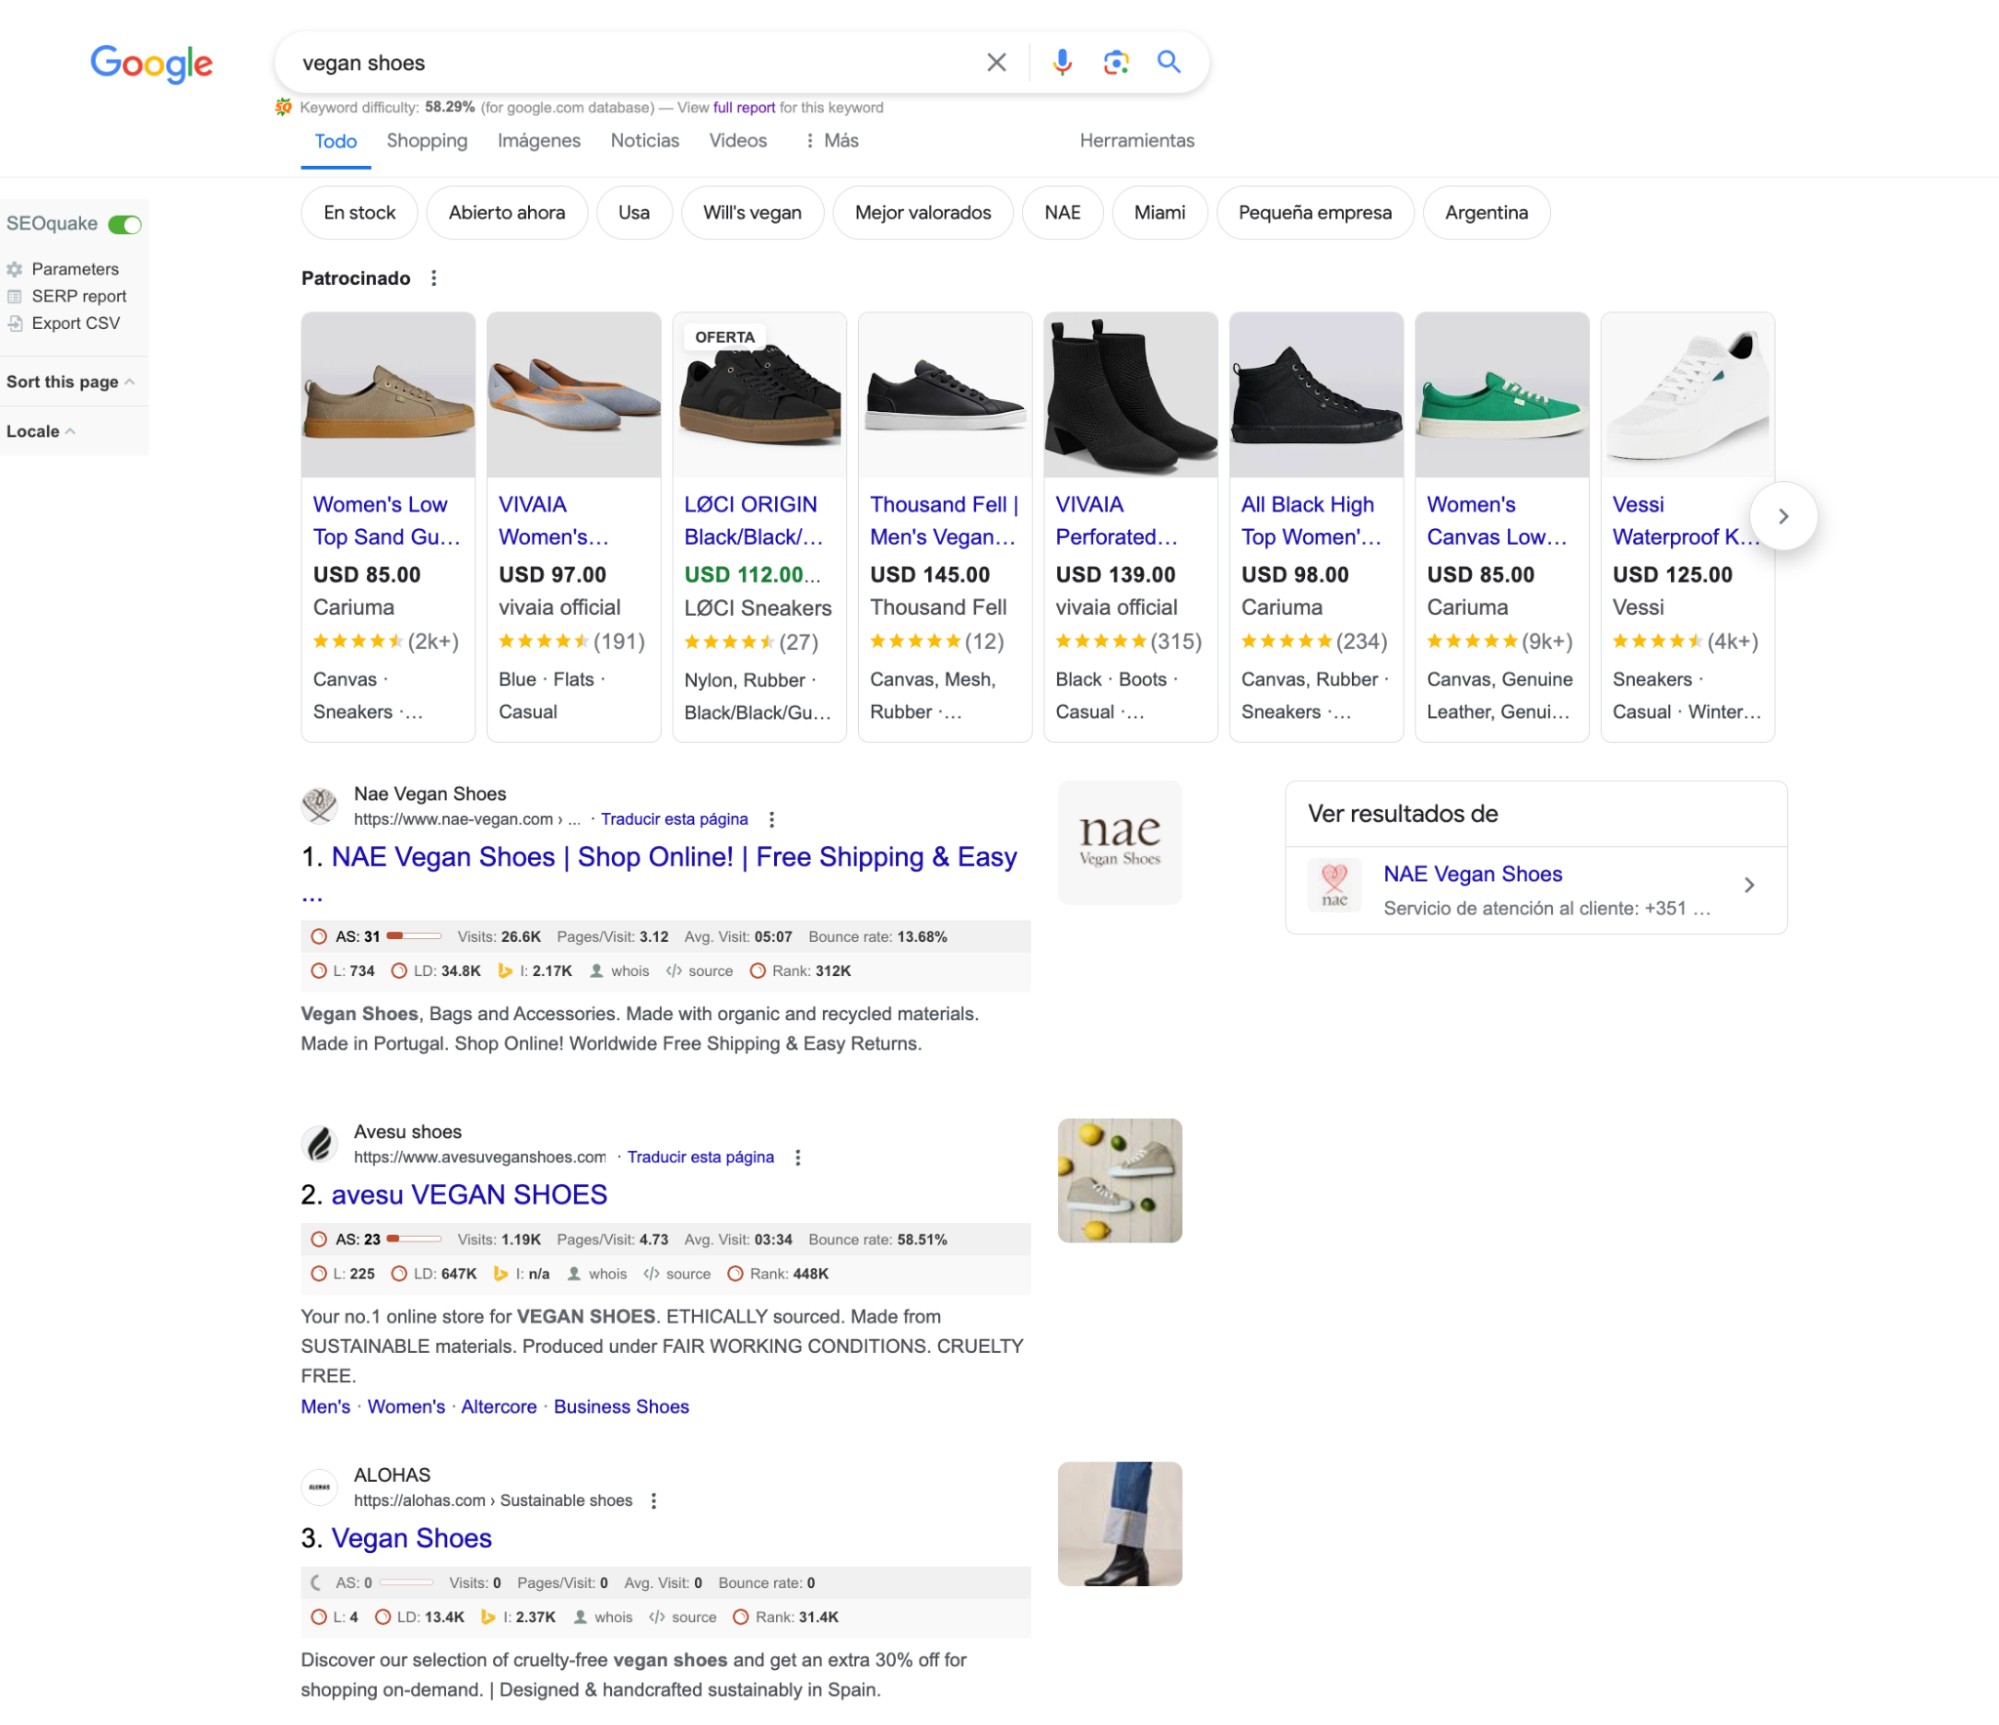 Google search for “vegan shoes” with sponsored ads and organic results for vegan brands.